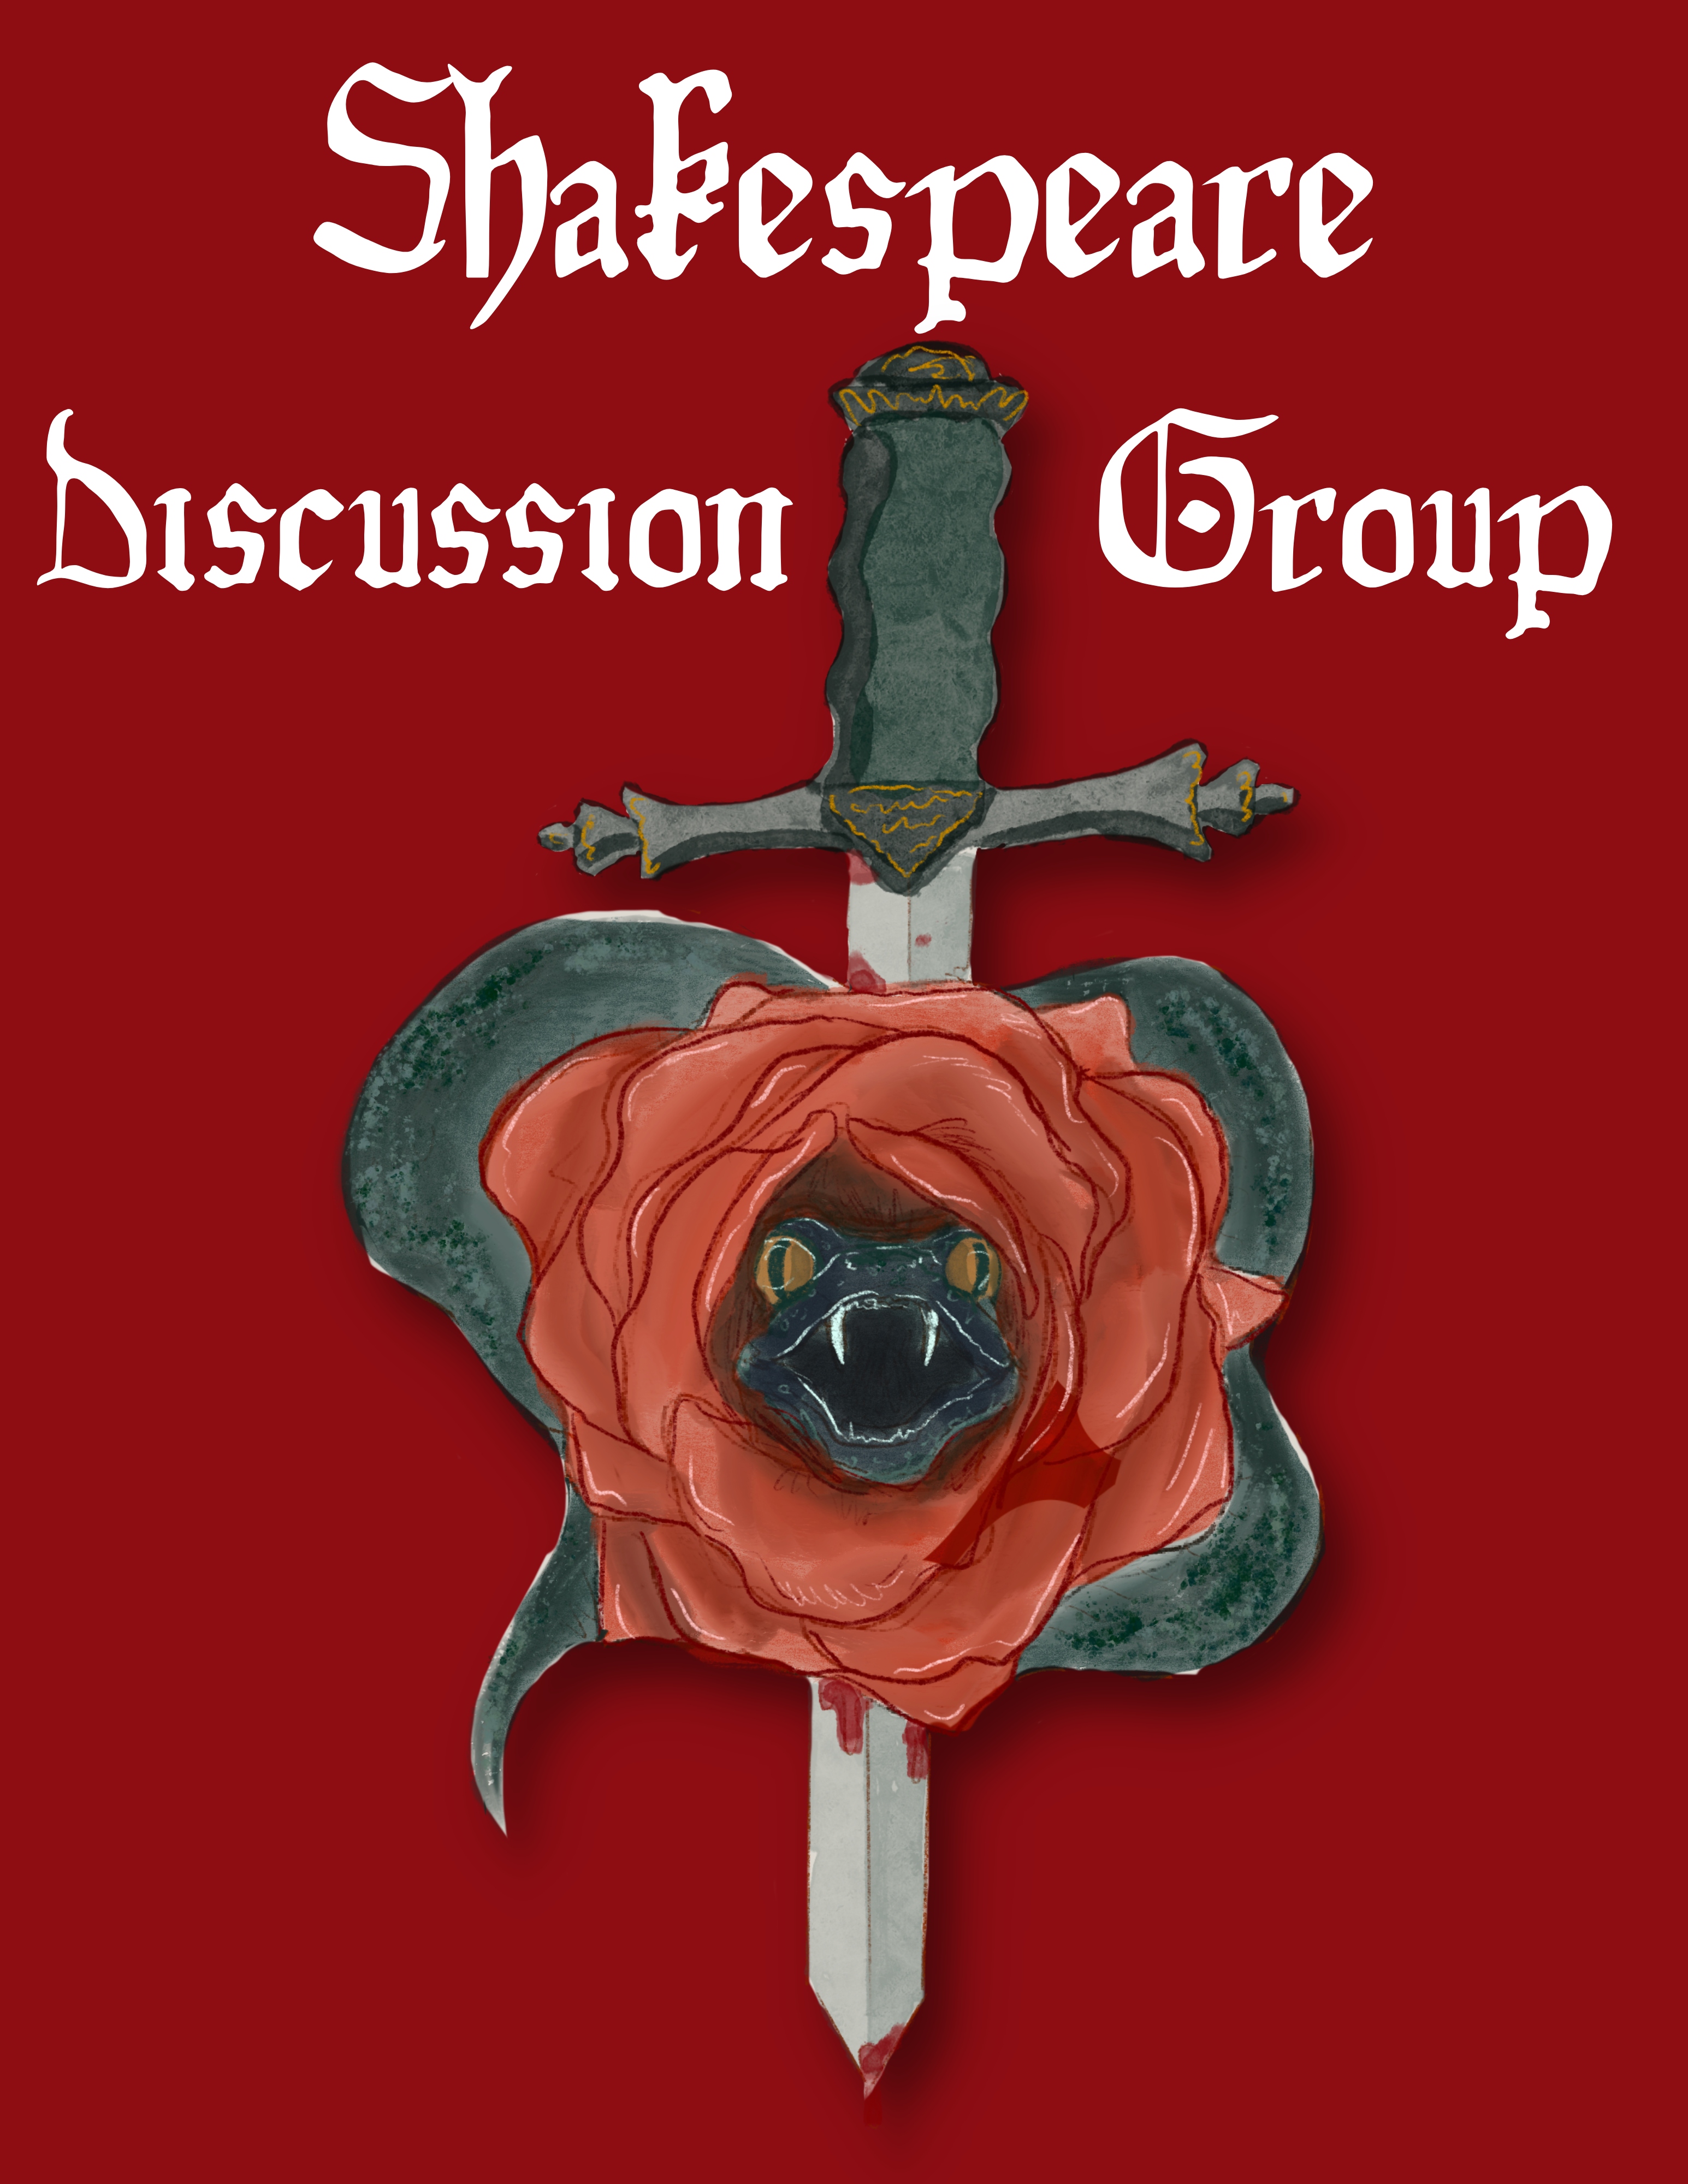 Rose with serpent in side with bloody sword, Shakespeare Discussion Group